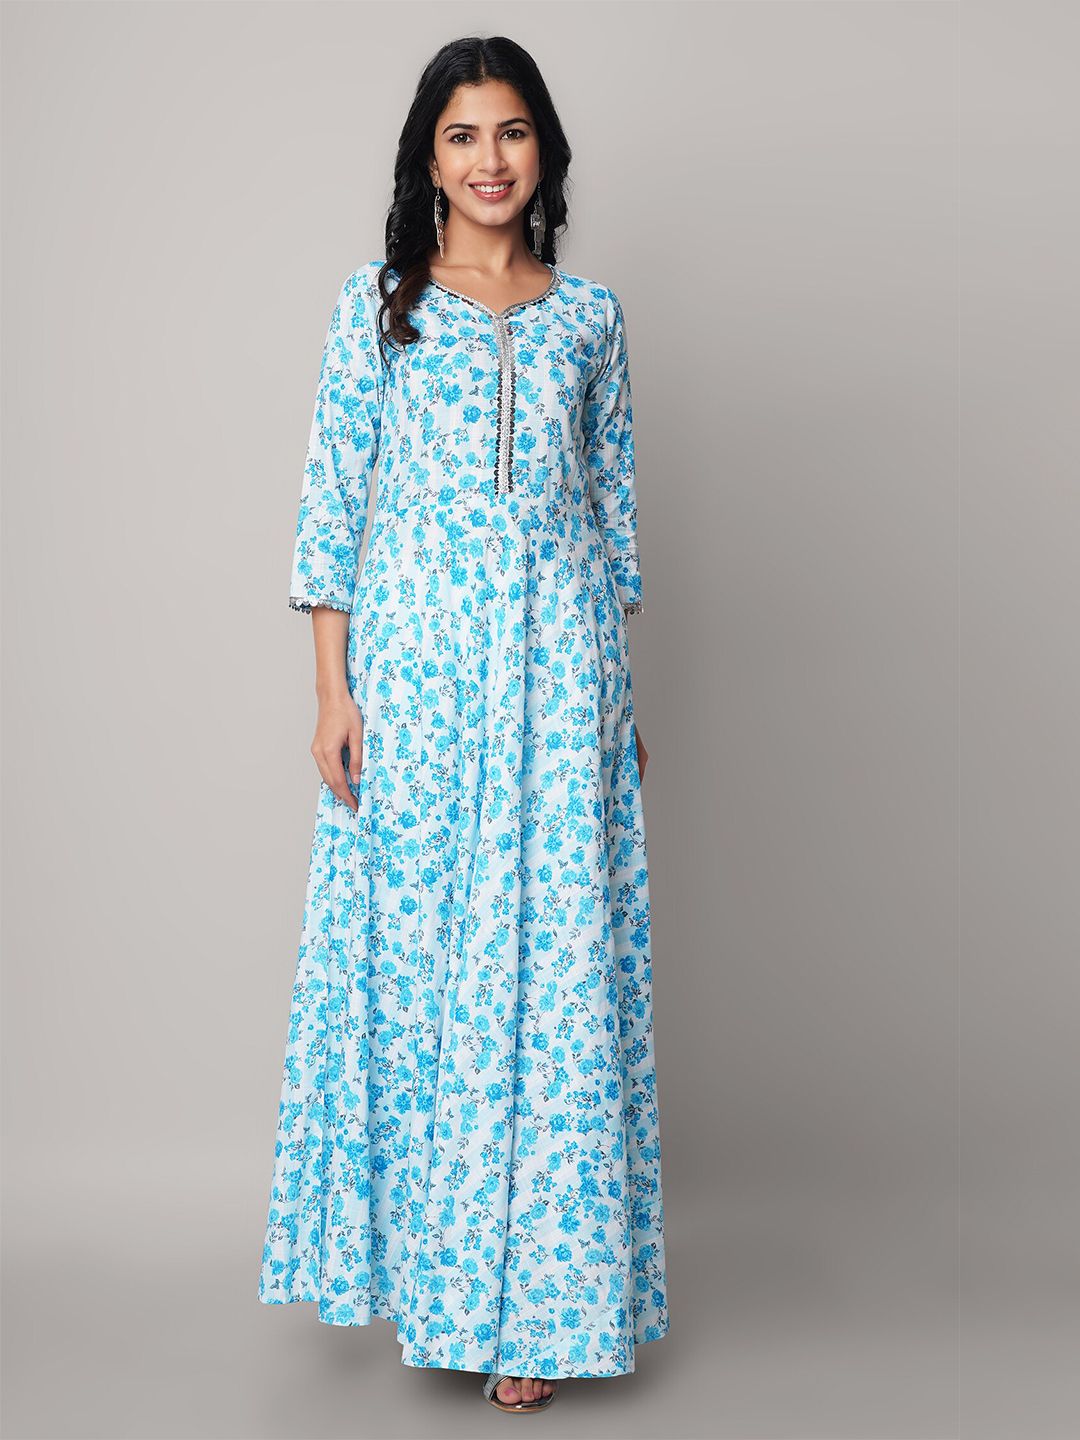 God Bless Turquoise Blue Floral Rayon Ethnic Maxi Dress Price in India